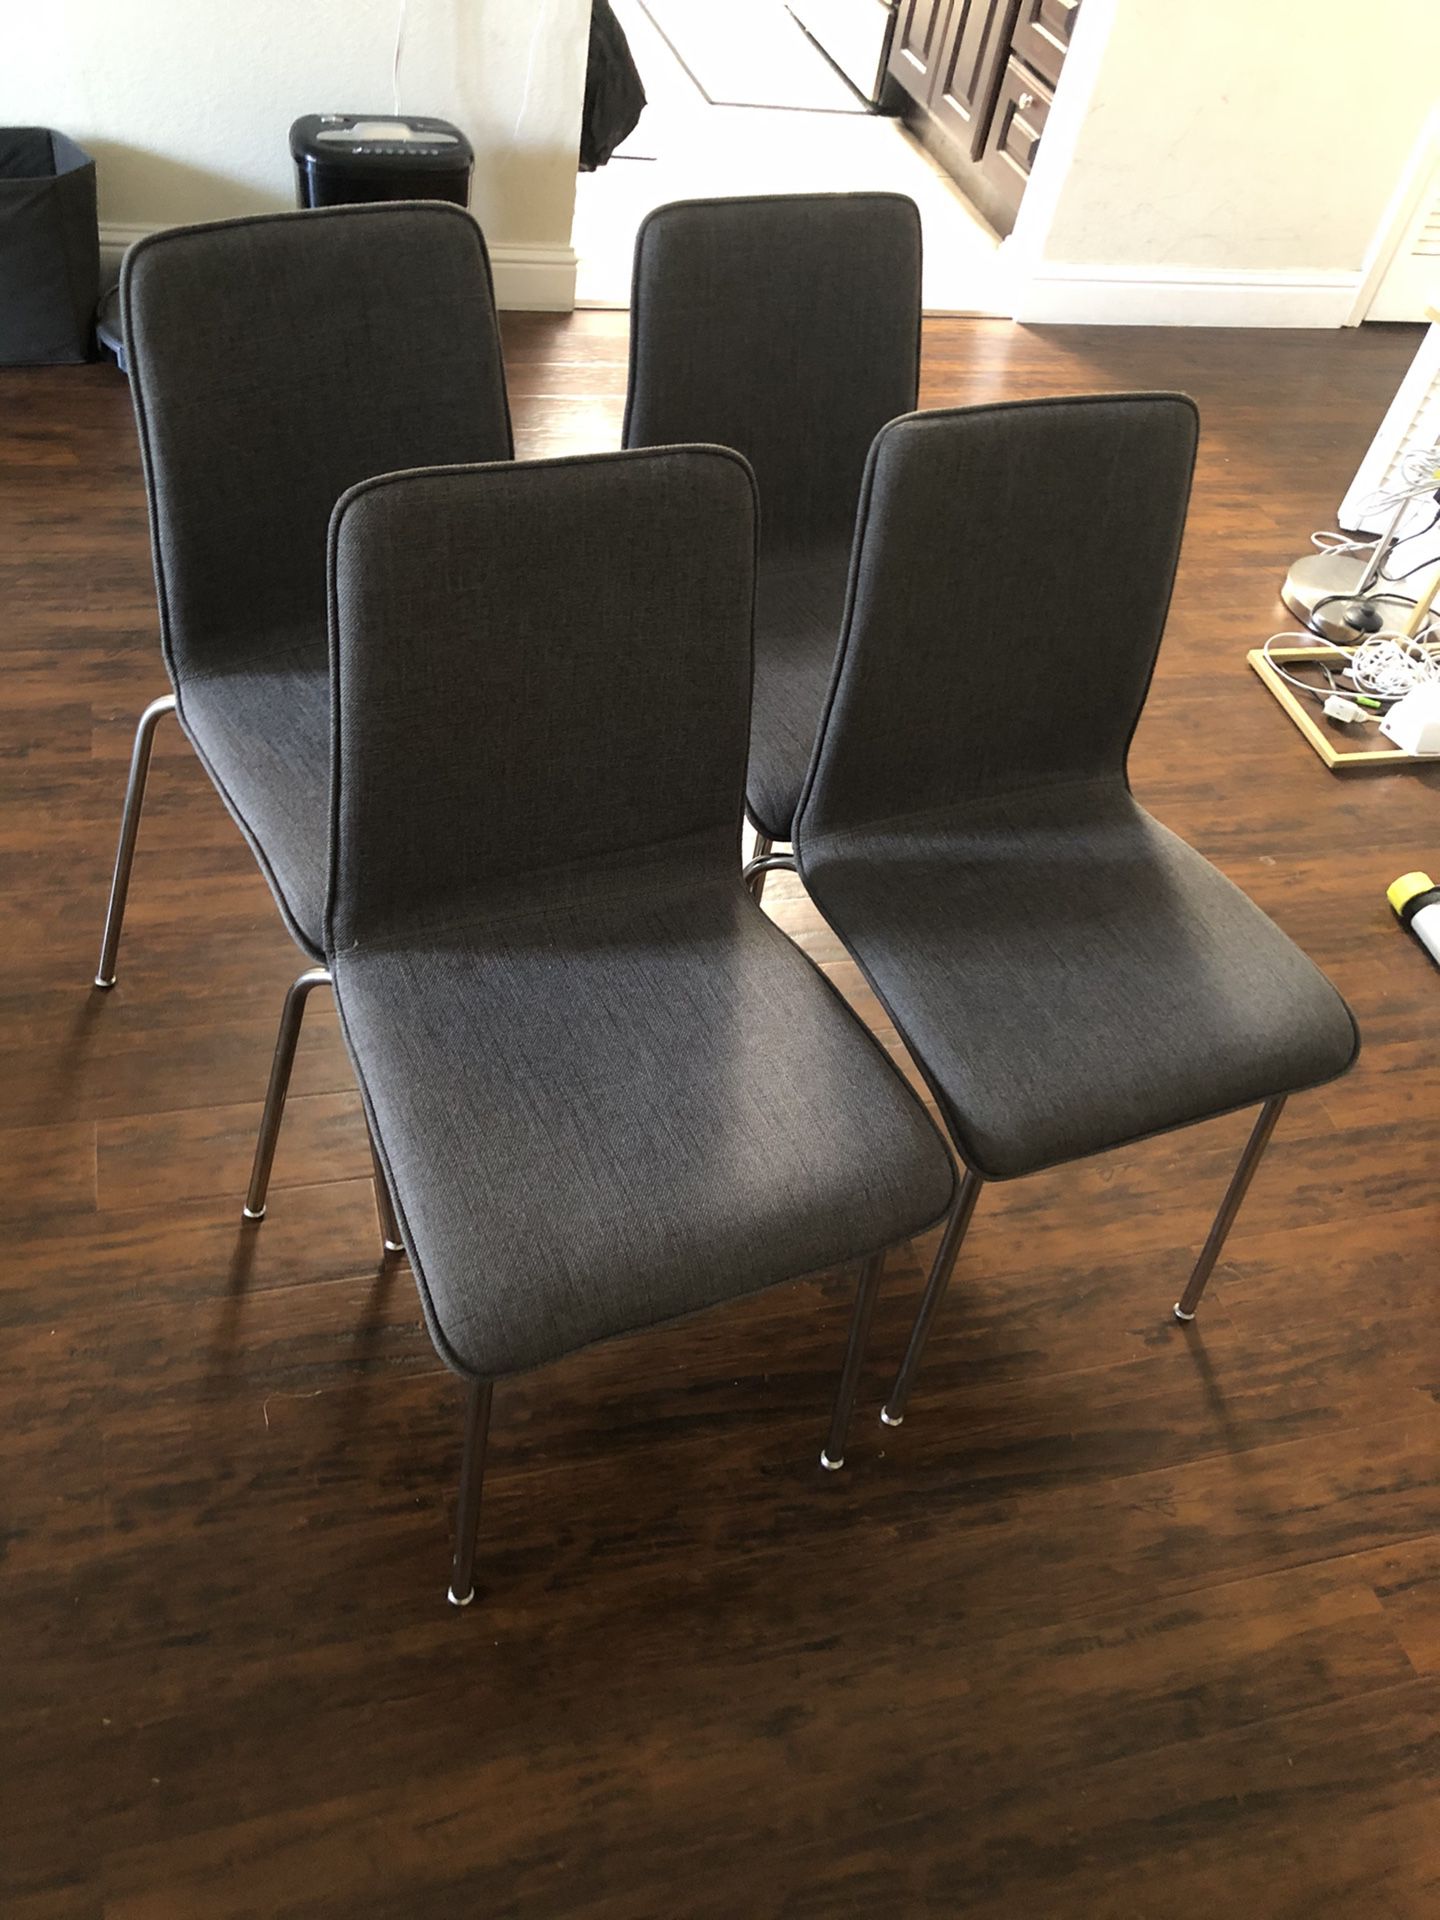 4 Dining Table/Kitchen Chairs